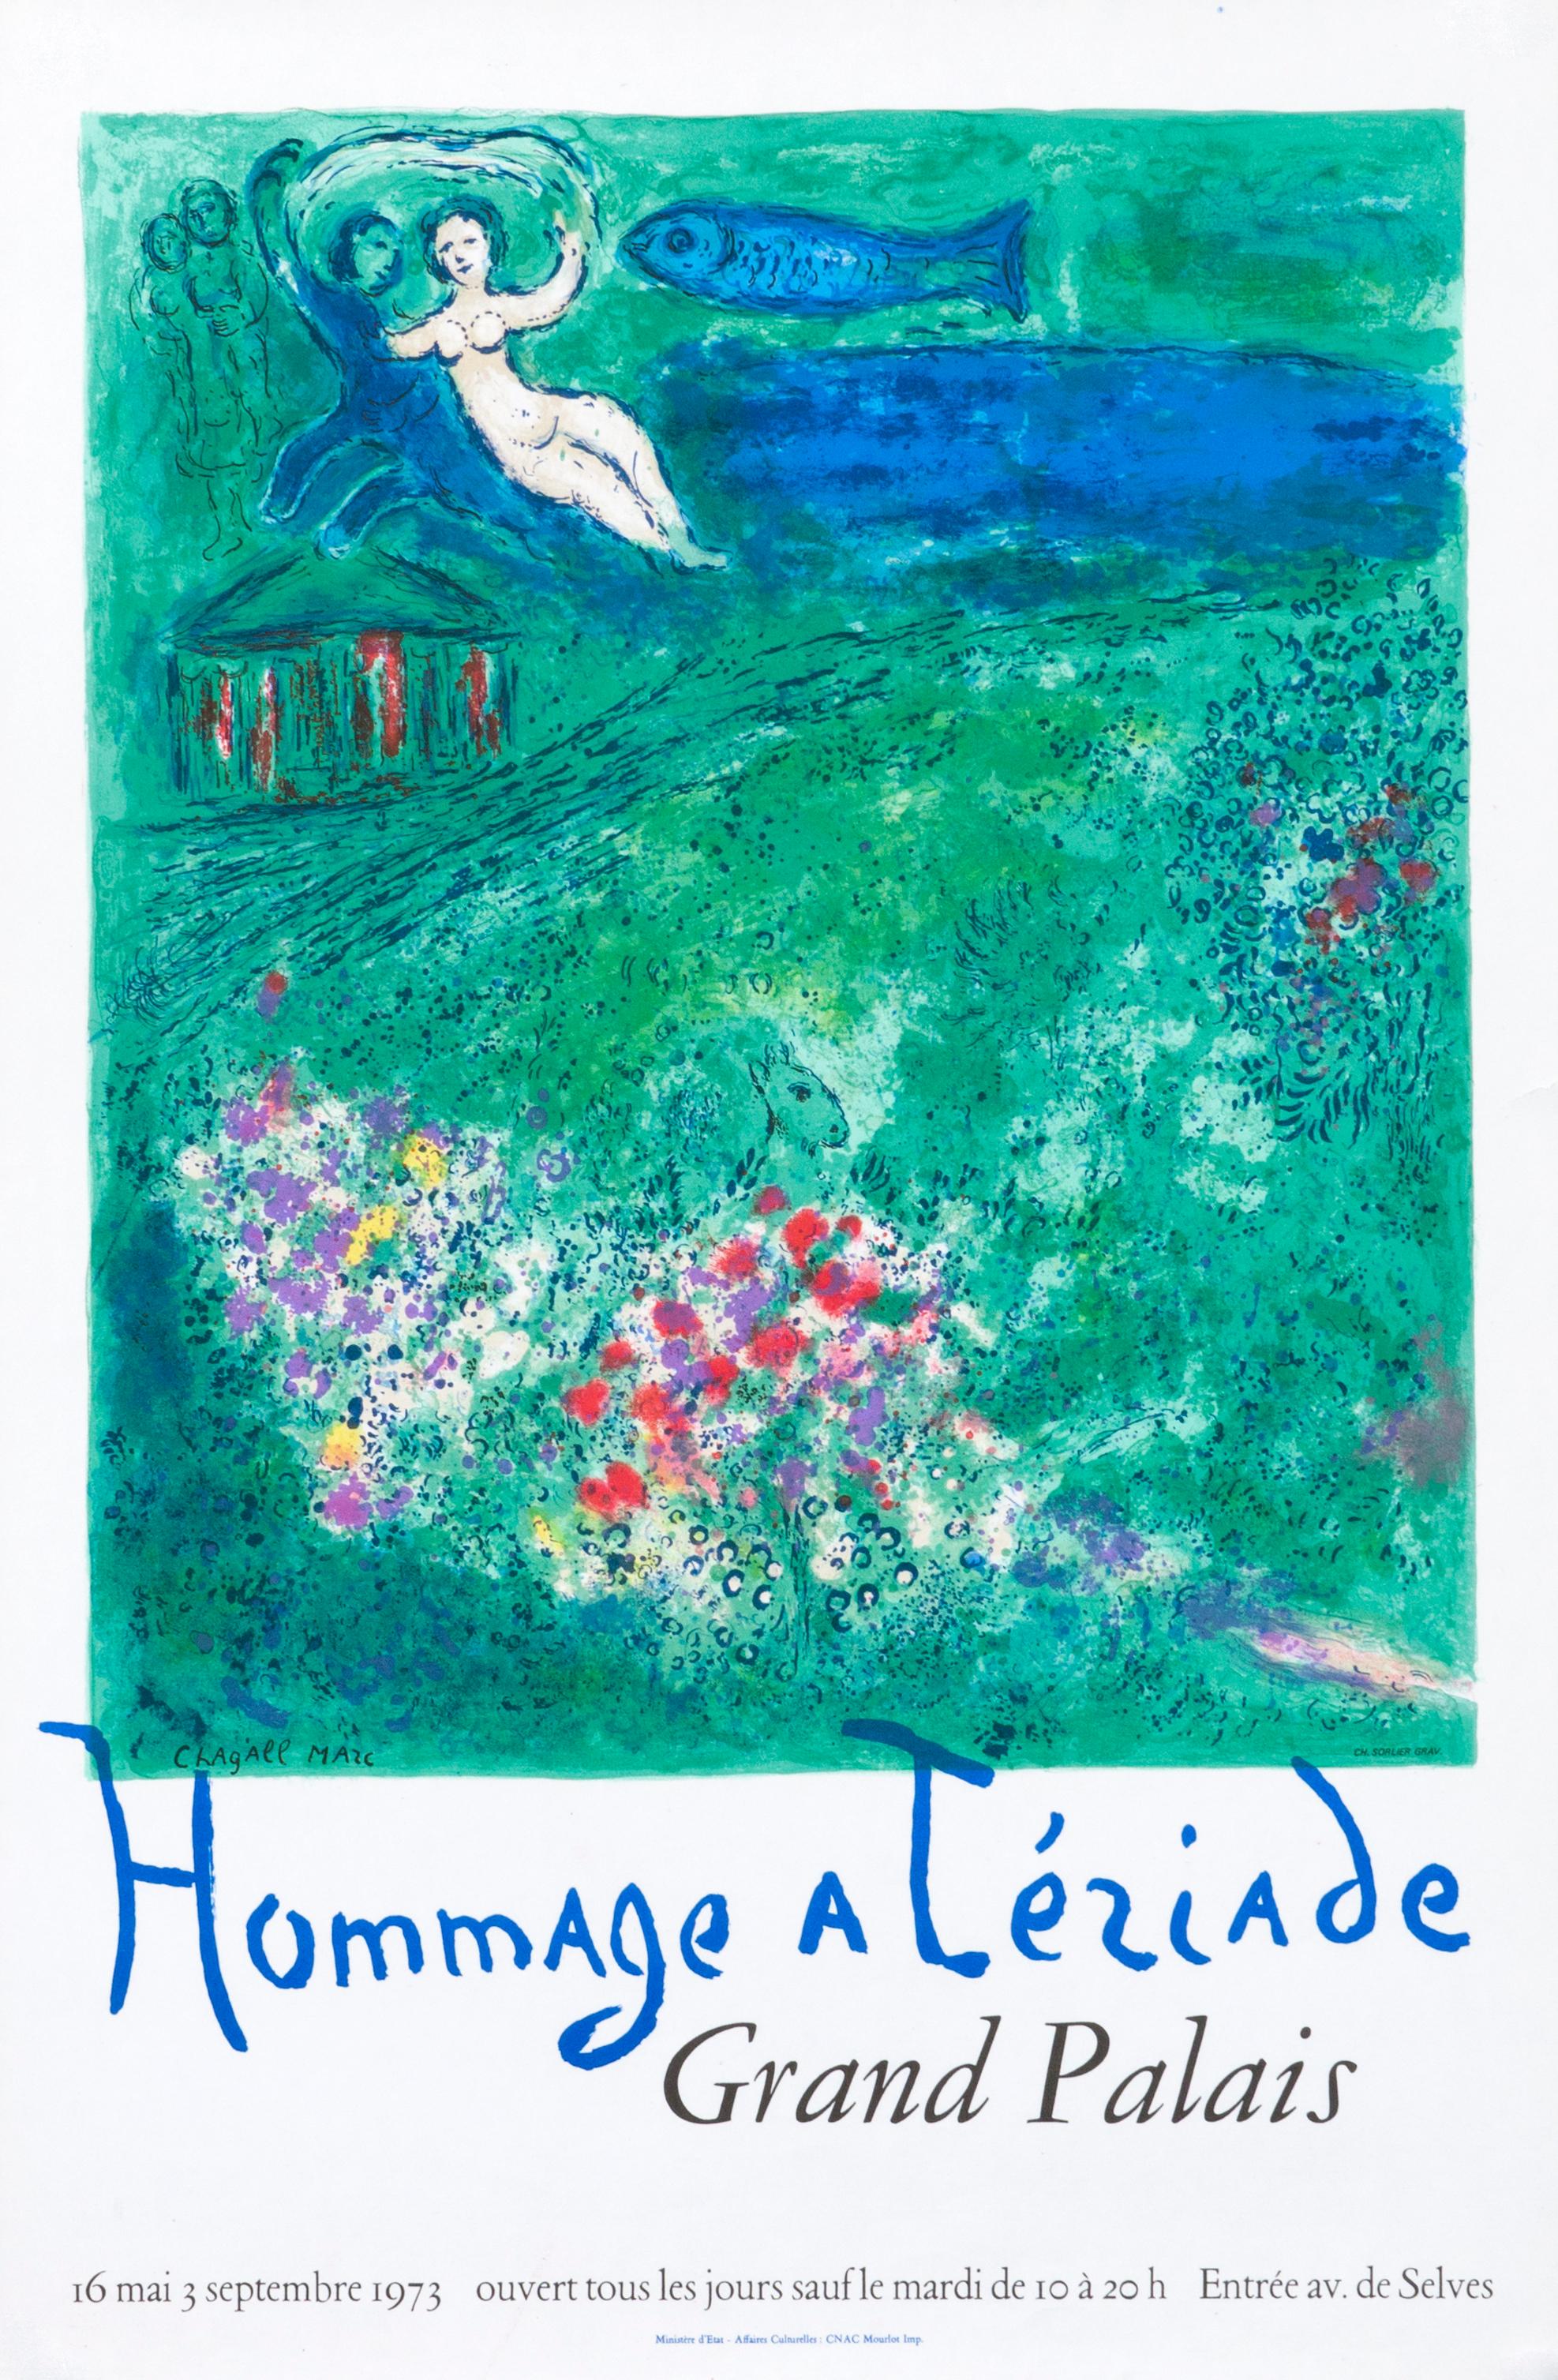 "Hommage a Teriade - Grand Palais" Chagall Original Vintage Exhibition Poster - Print by Marc Chagall